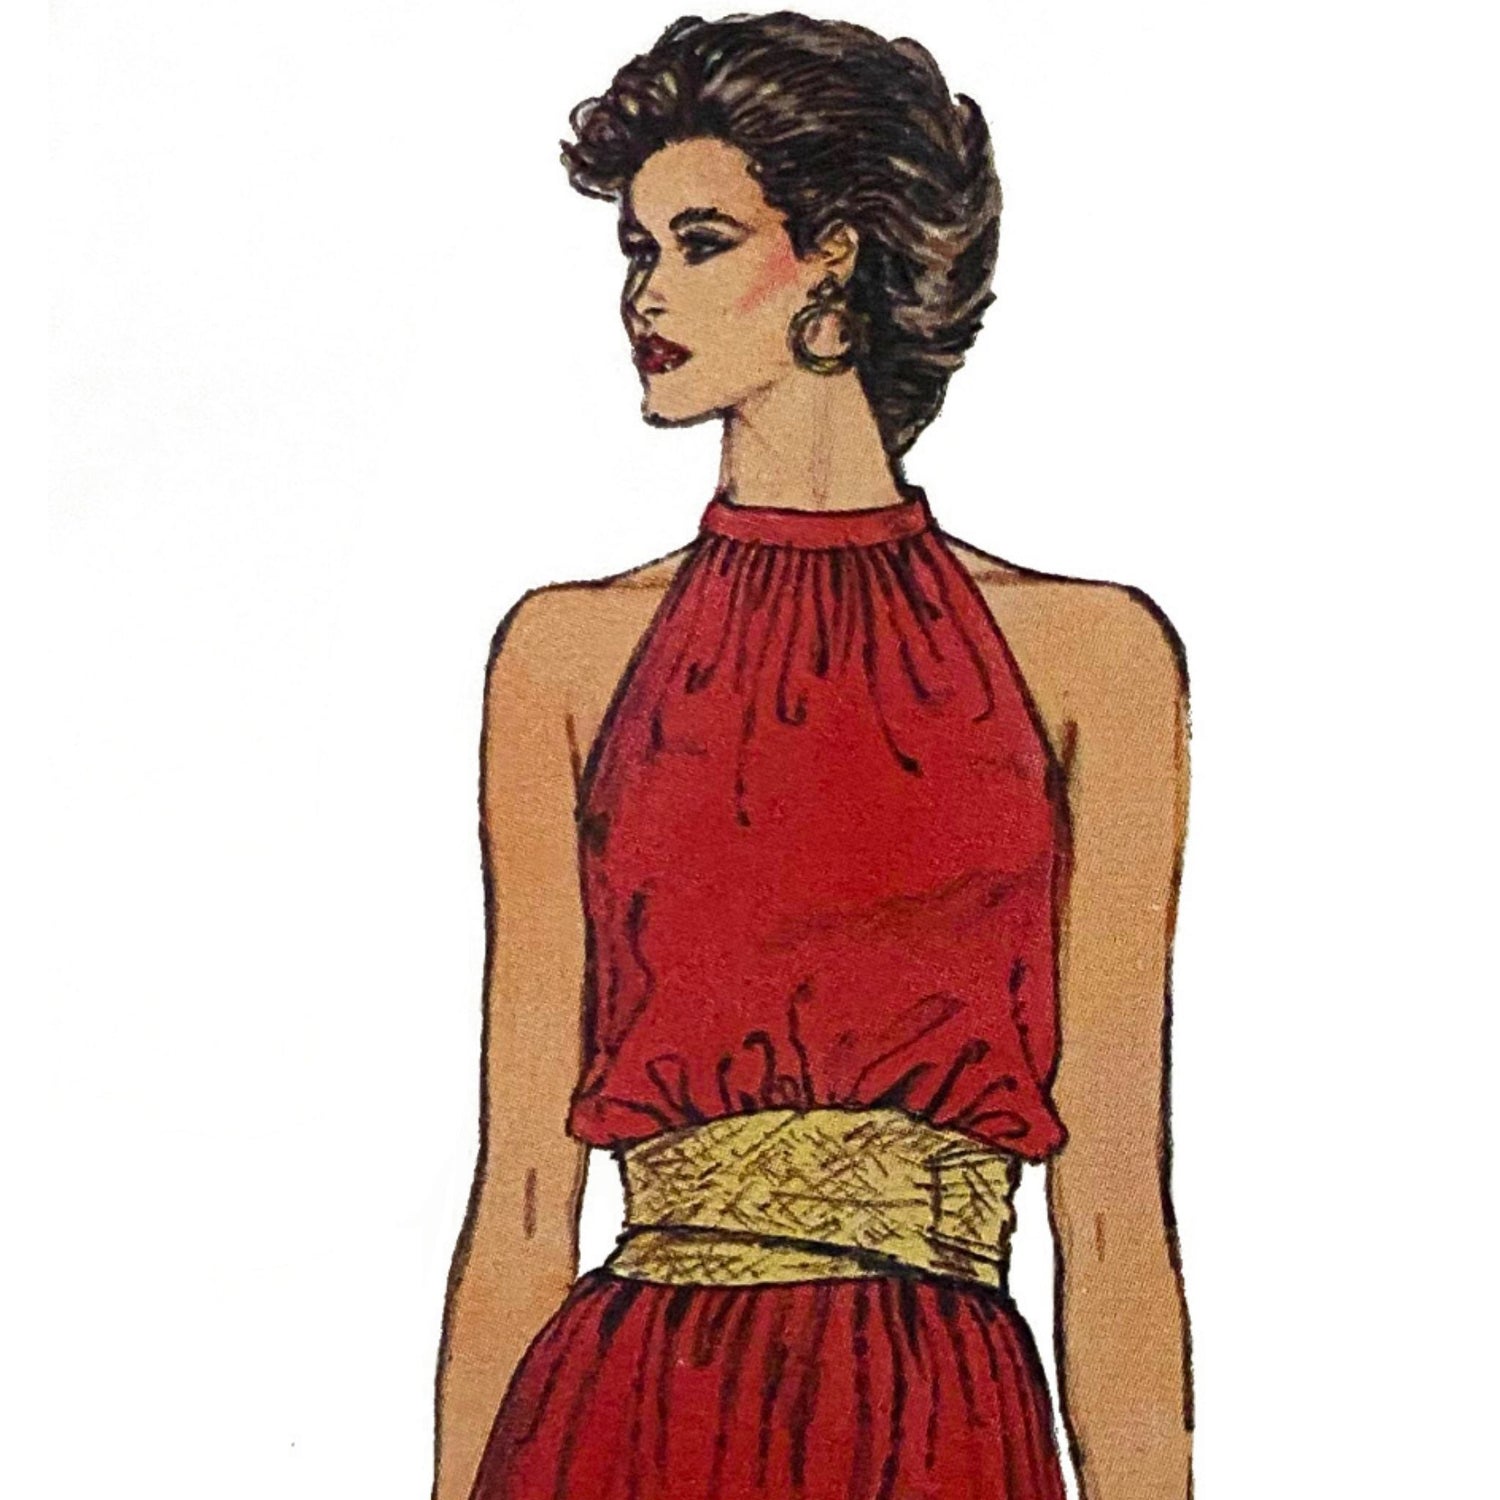 Model wearing dress made from Vogue 8322 pattern